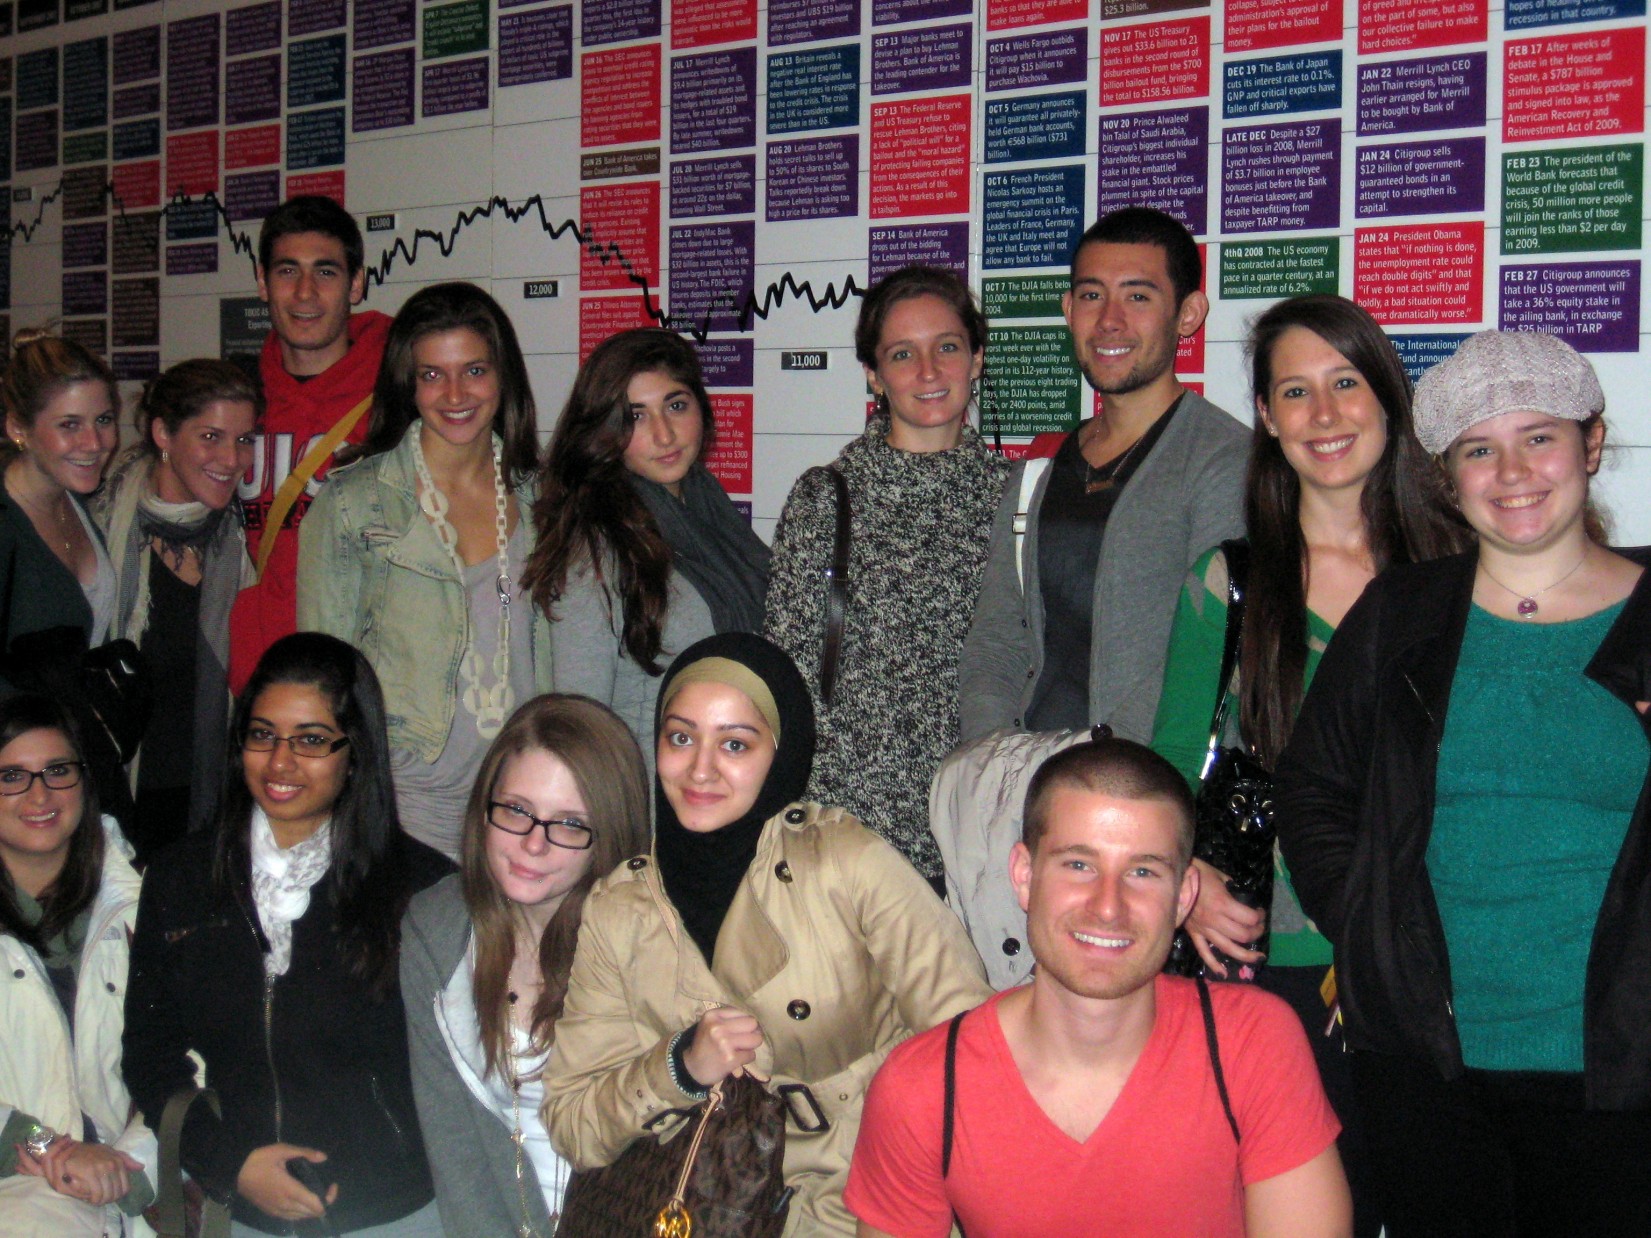 Group photo of students